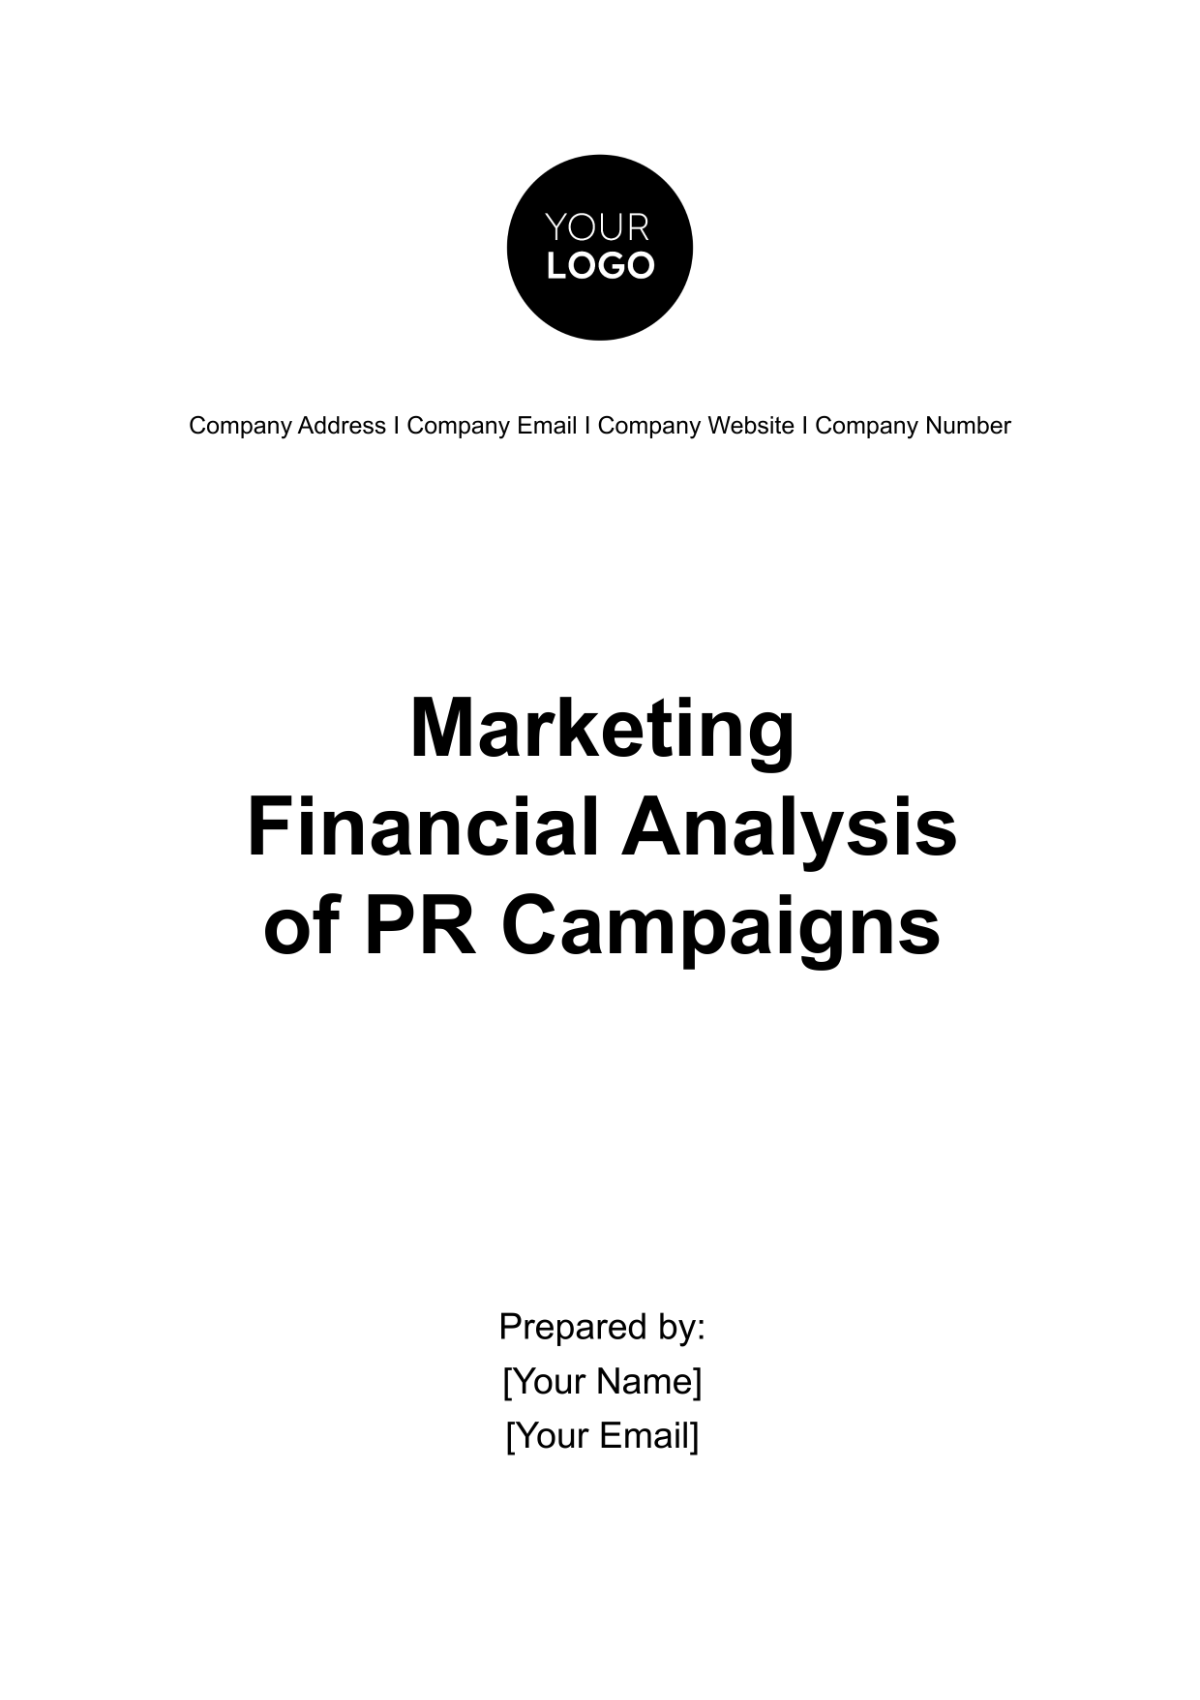 Marketing Financial Analysis of PR Campaigns Template